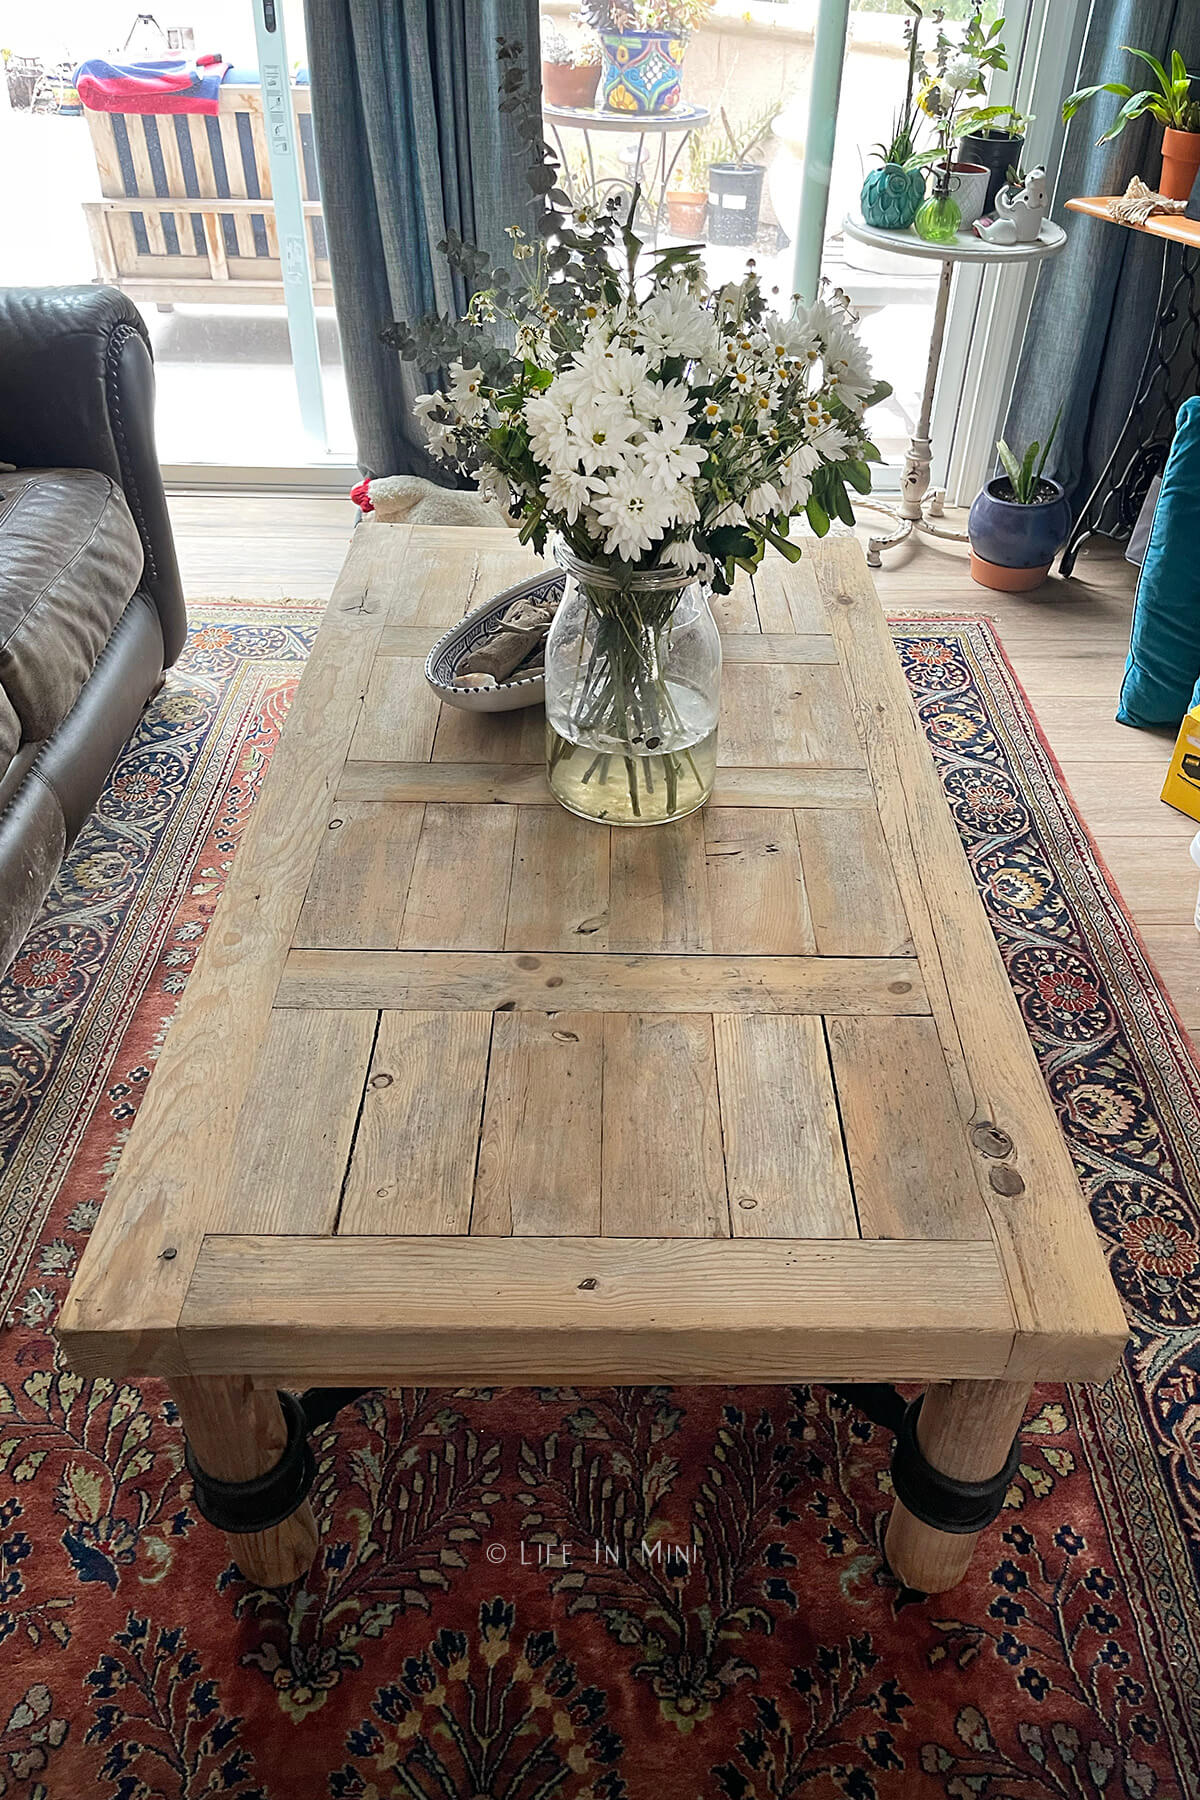 A light wood coffee table in a living room after it the wood was bleached